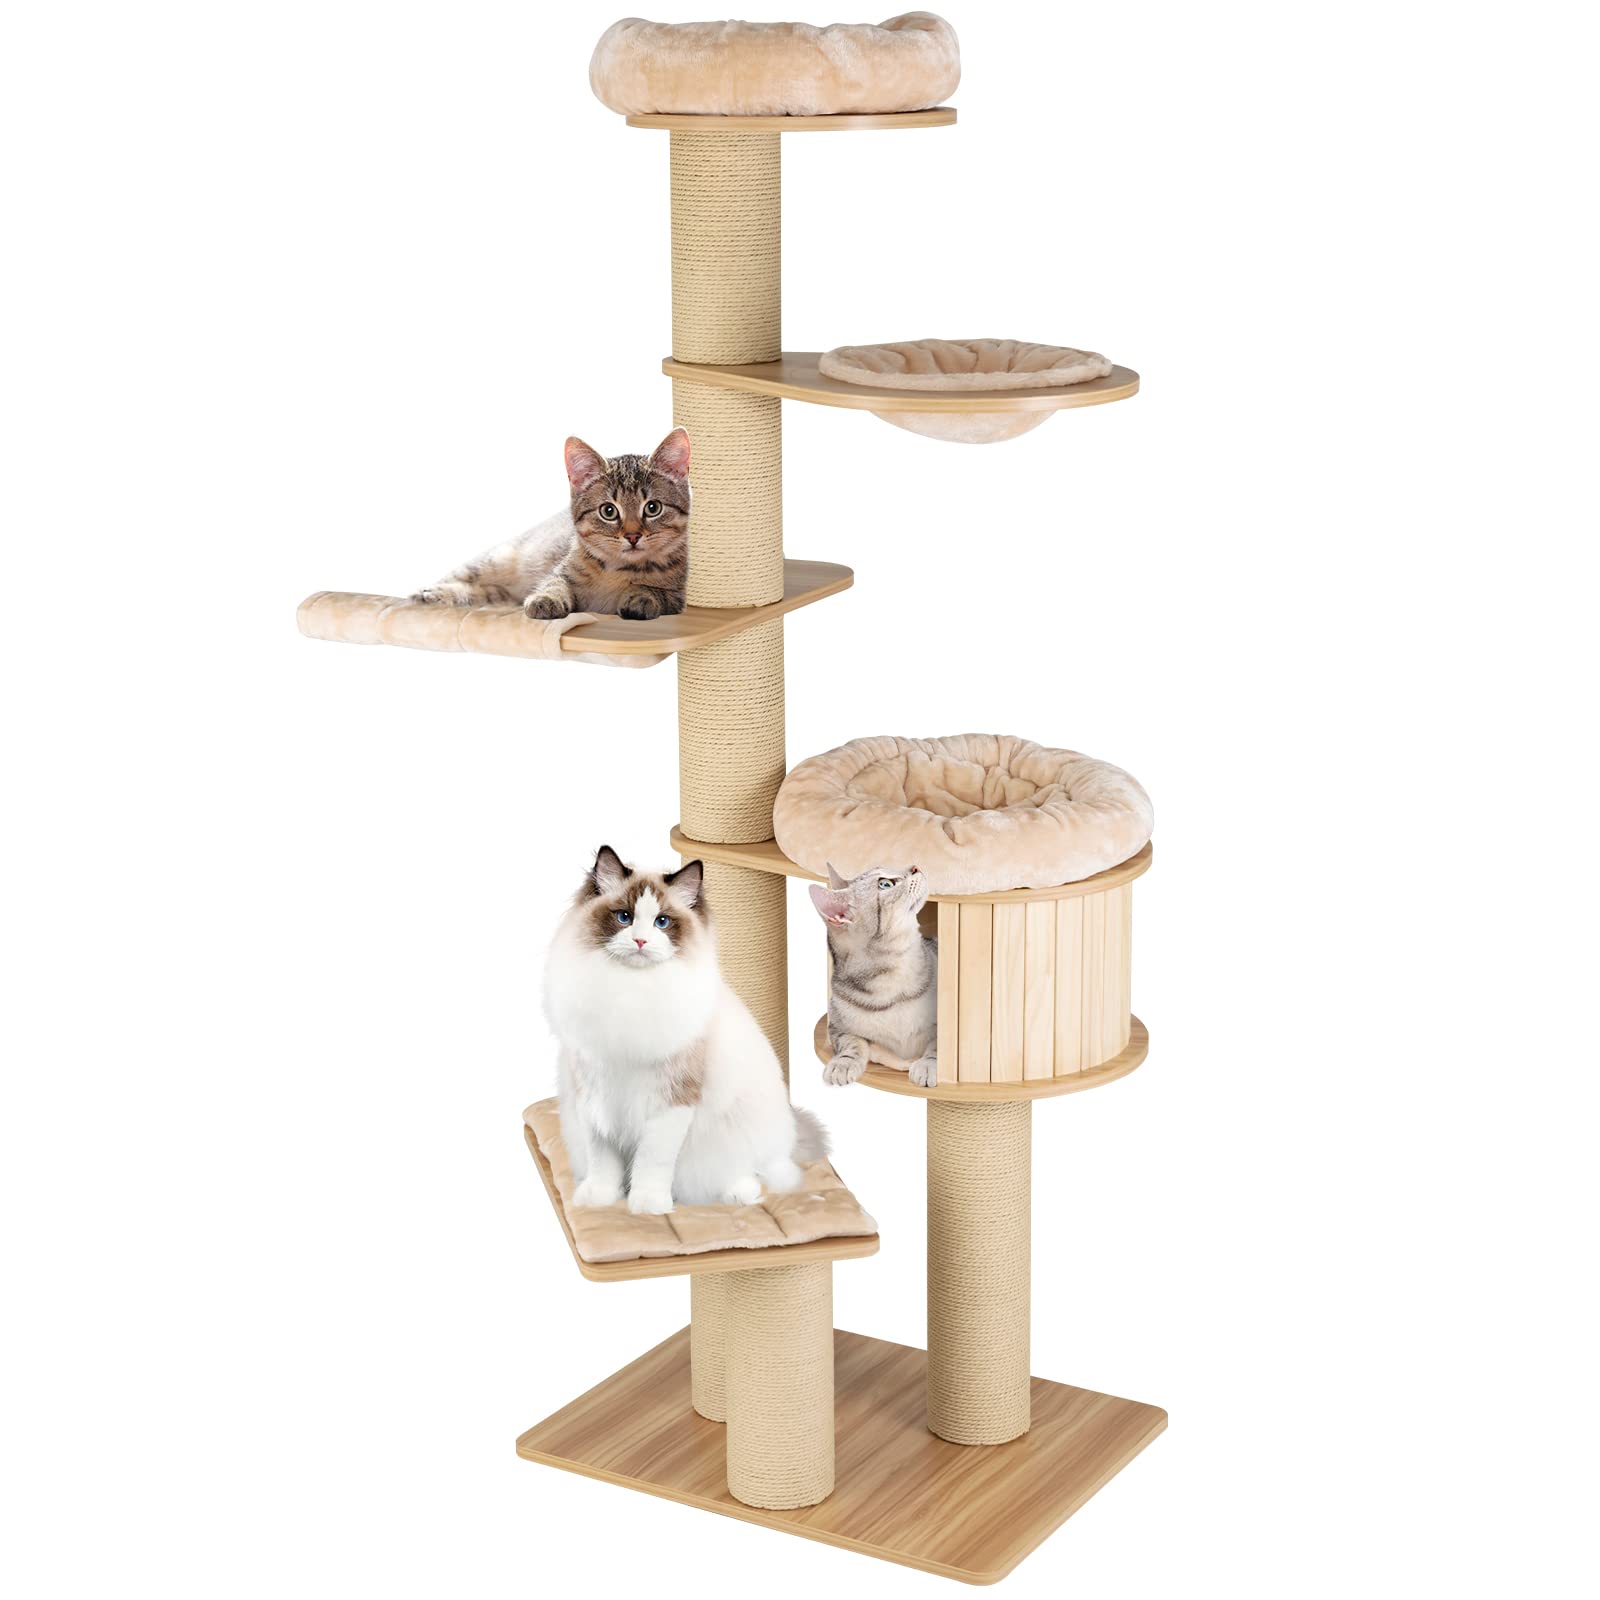 Tangkula Modern Cat Tree, Multi-Level Large Cat Tower w/Cat Condo, Hammocks & Hanging Basket for Indoor Large Cats